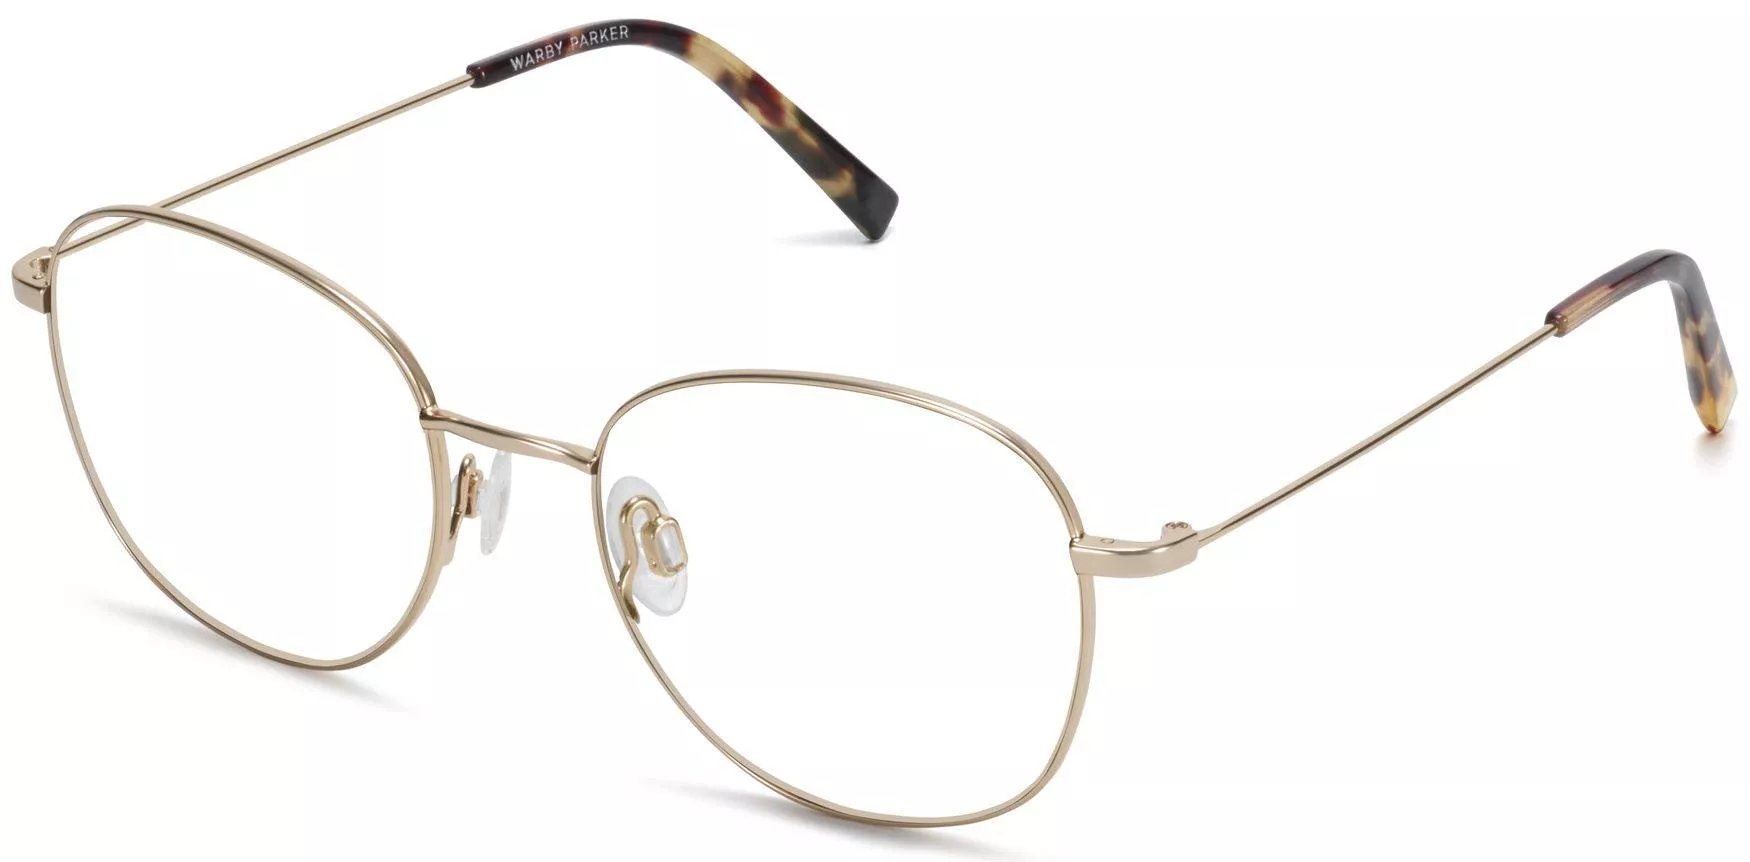 Angle View Image of Cyrus Eyeglasses Collection, by Warby Parker Brand, in Polished Gold Color